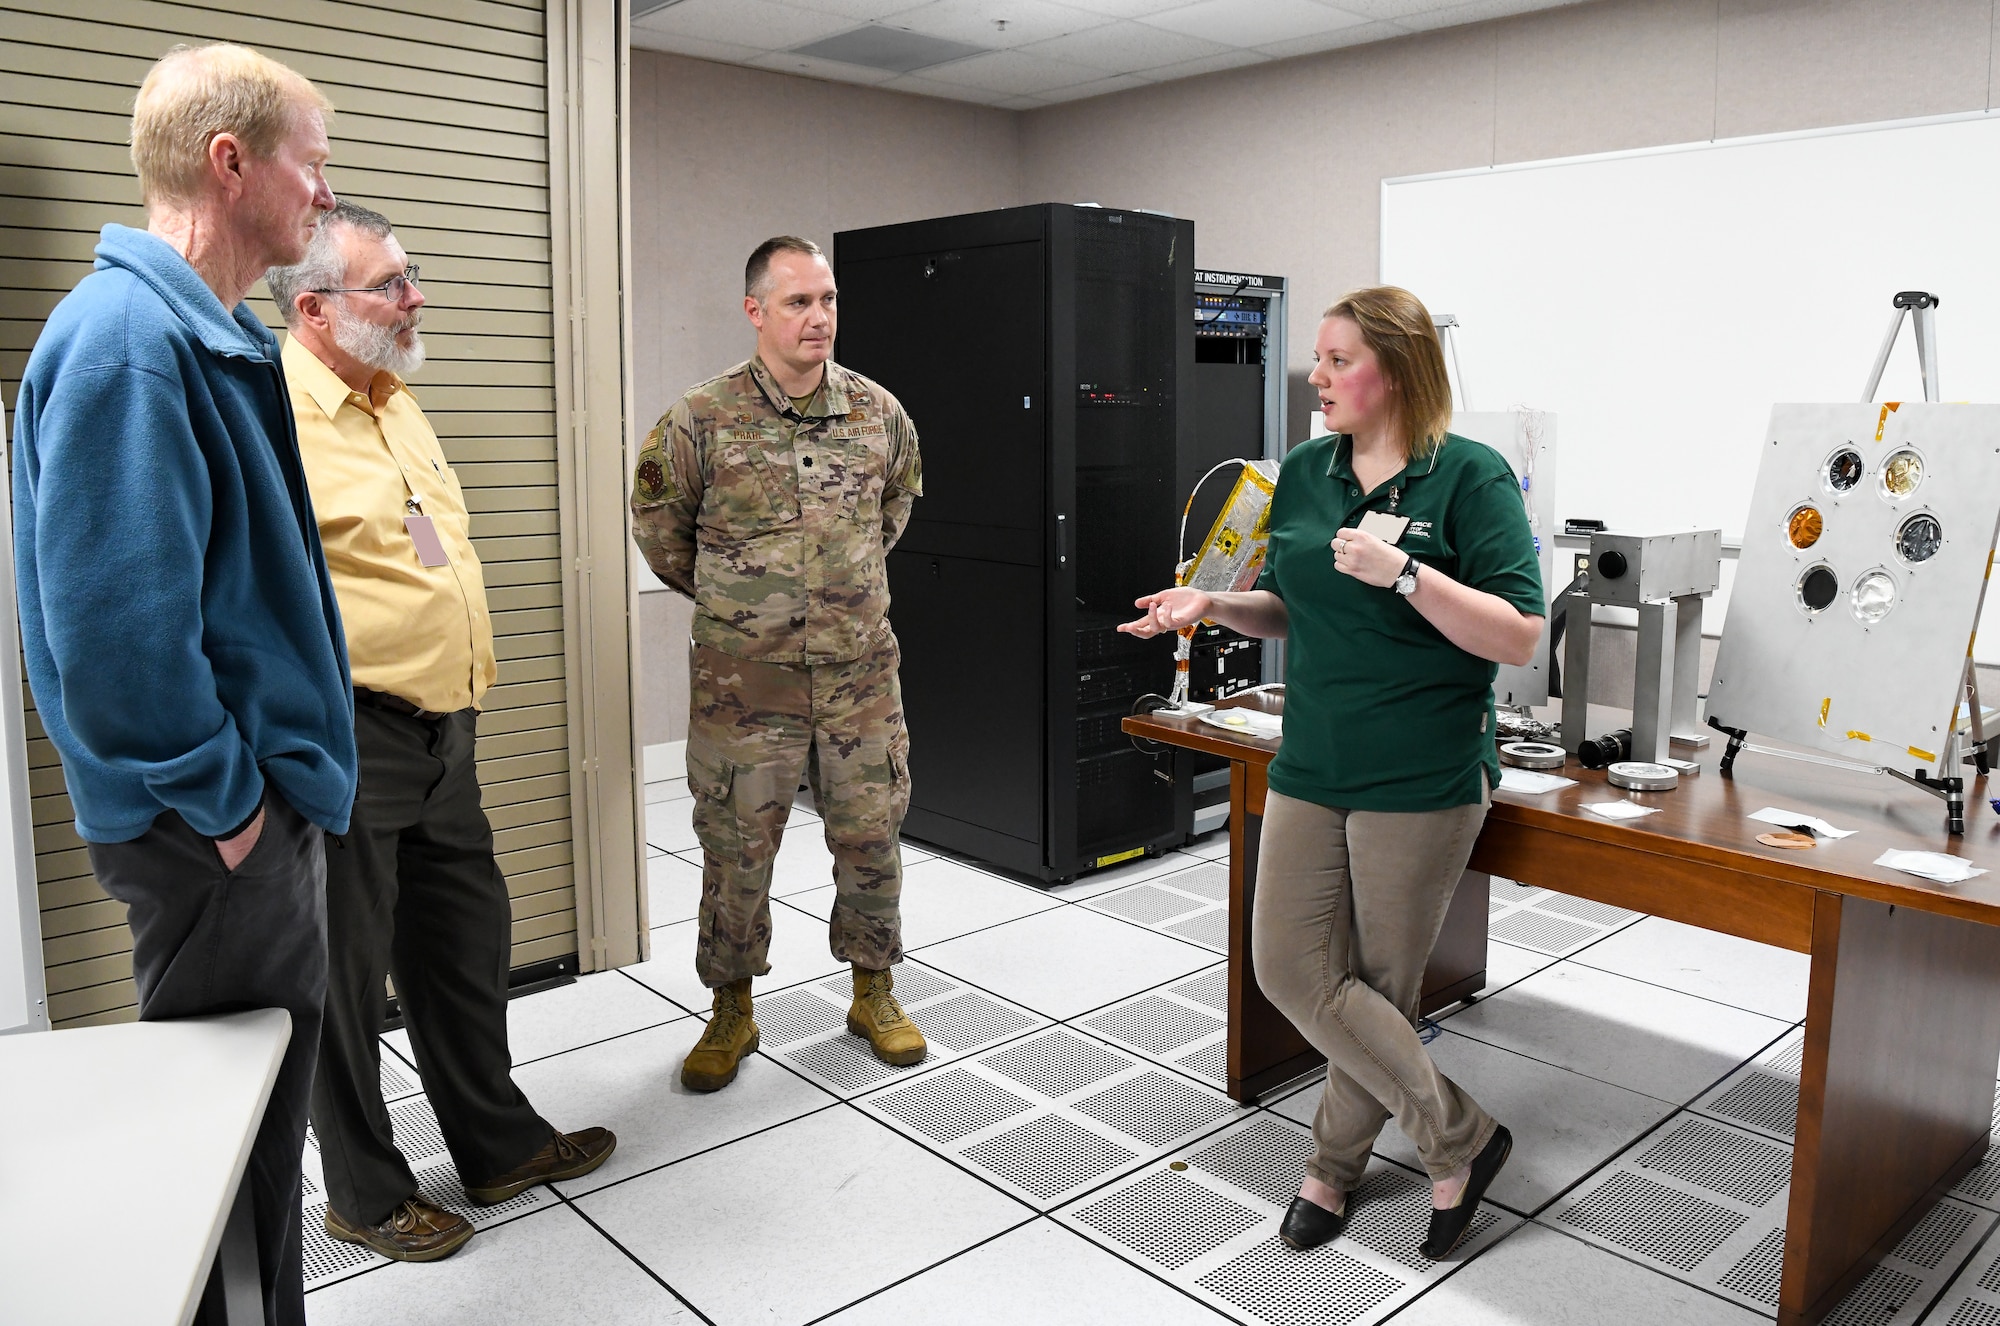 Lindsay Anderson, Arnold Engineering Development Complex flight chief for space asset resilience, 718th Test Squadron, speaks to three gentlemen standing at left about the space chambers located at Arnold Air Force Base.